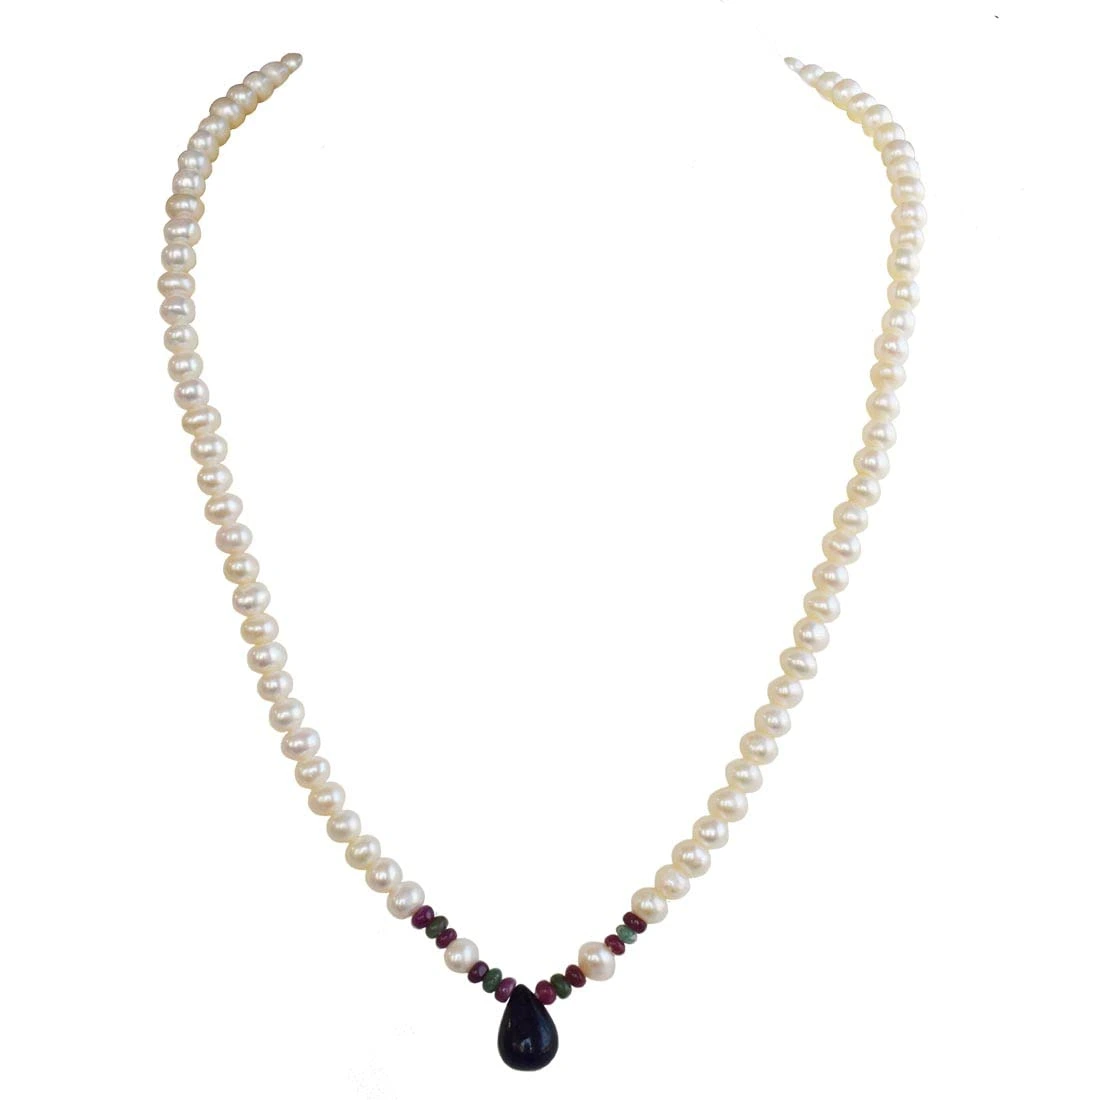 Sapphire, Emerald, Ruby Beads & Rice Pearl Necklace